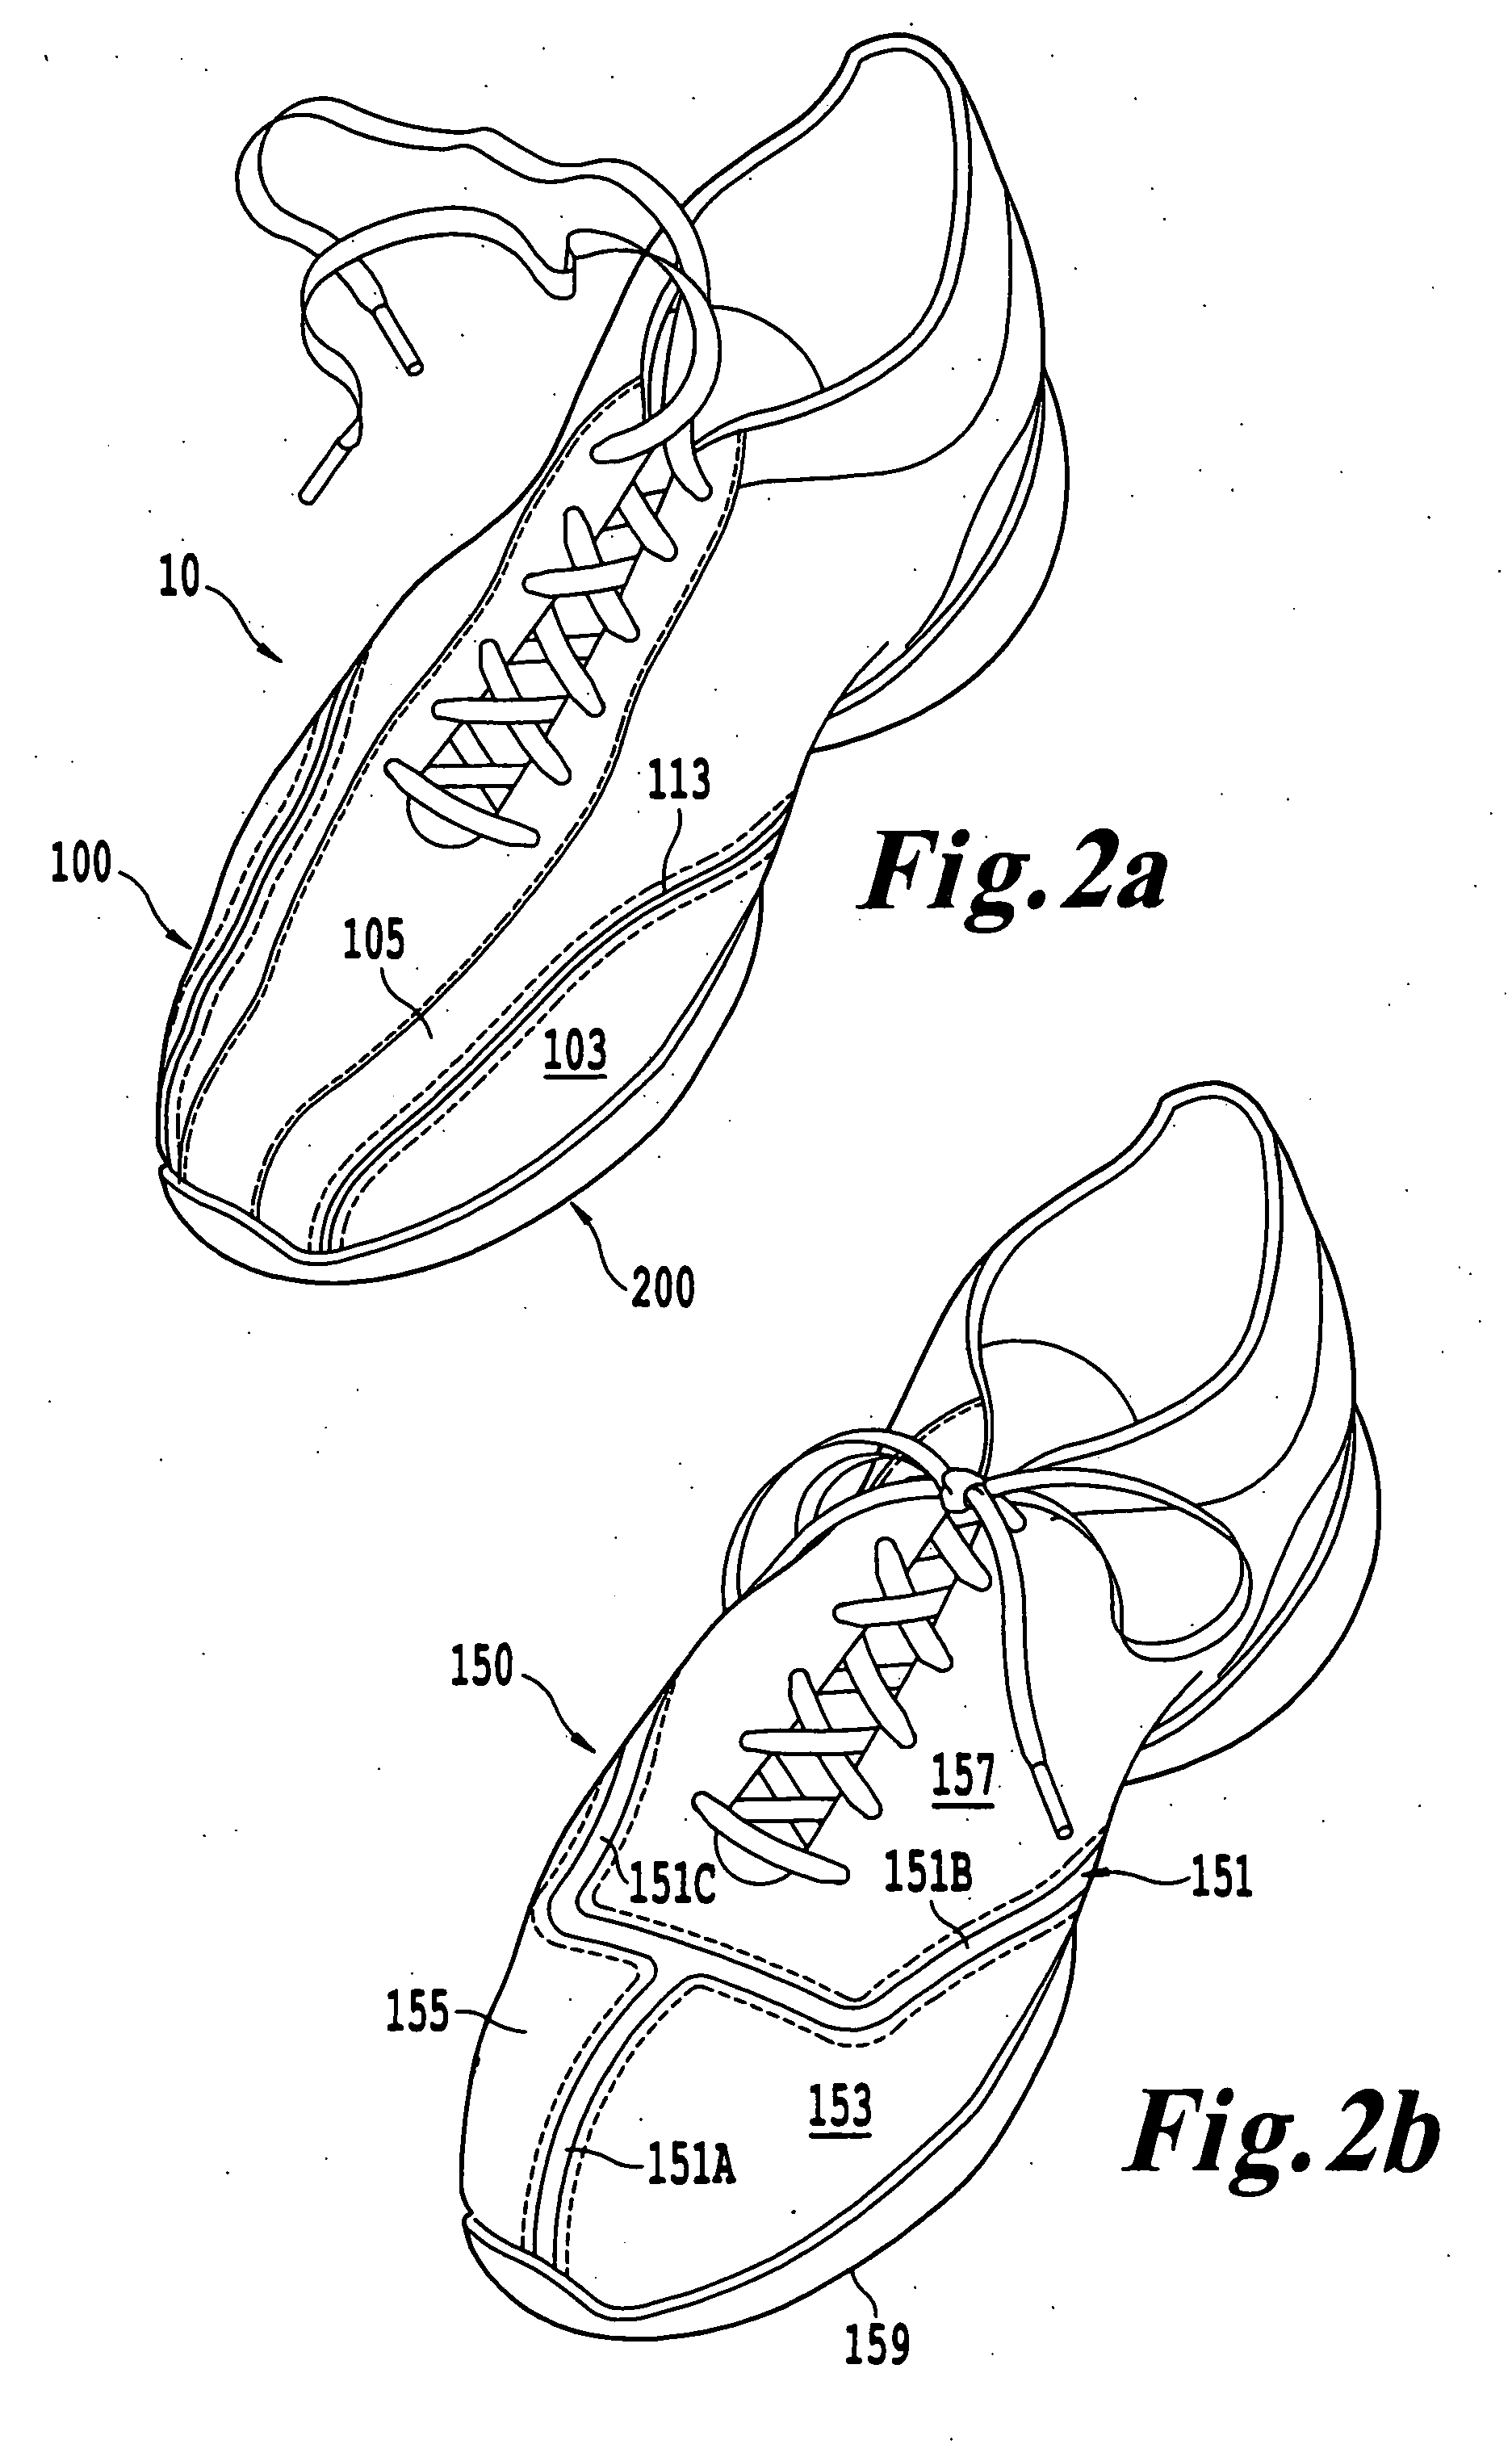 Method and system for providing customized footwear to a retail consumer